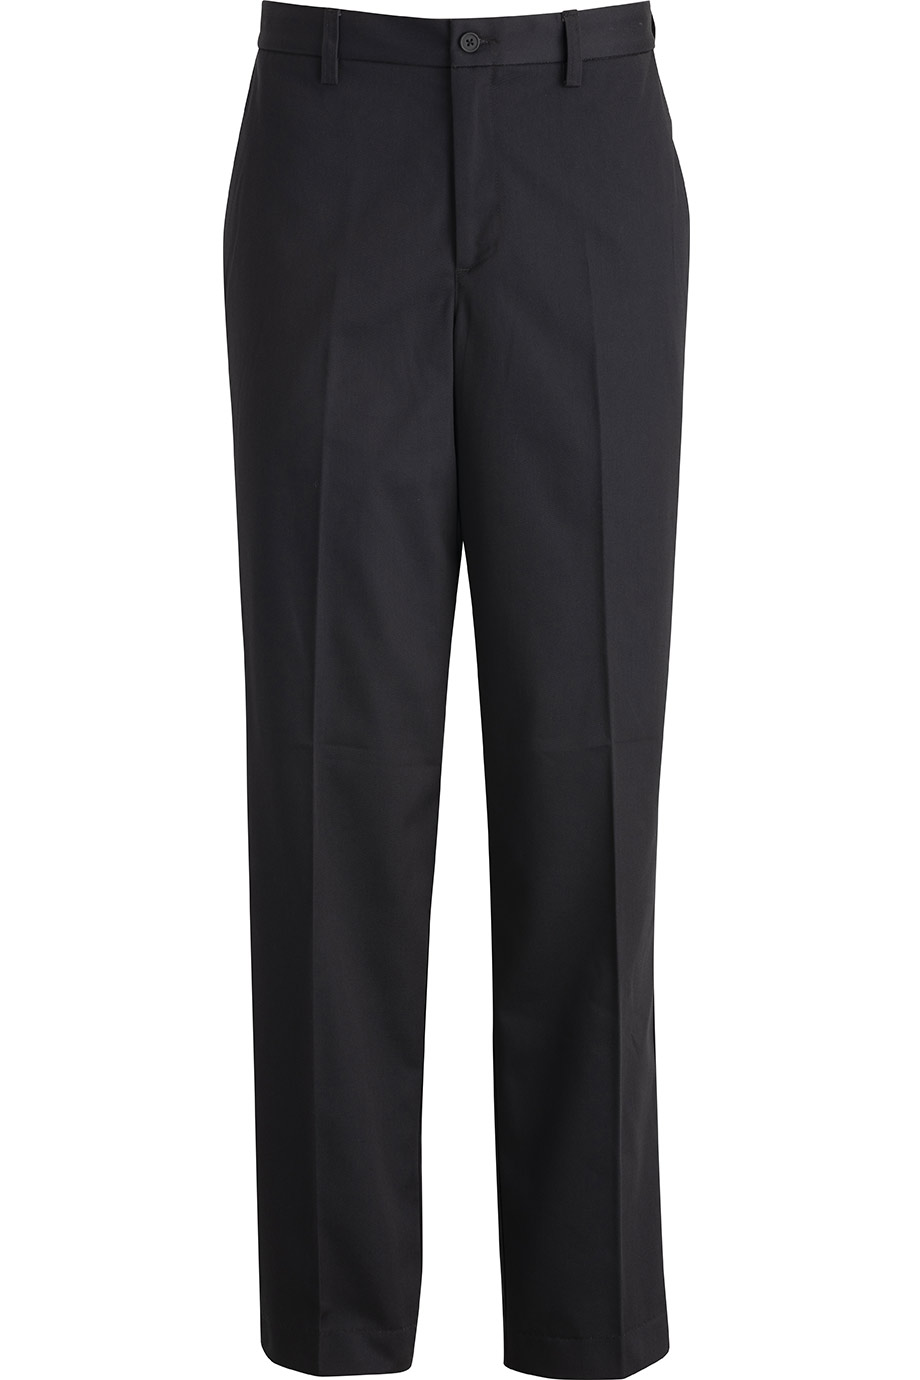 EZ FIT UTILITY CHINO FLAT FRONT PANT